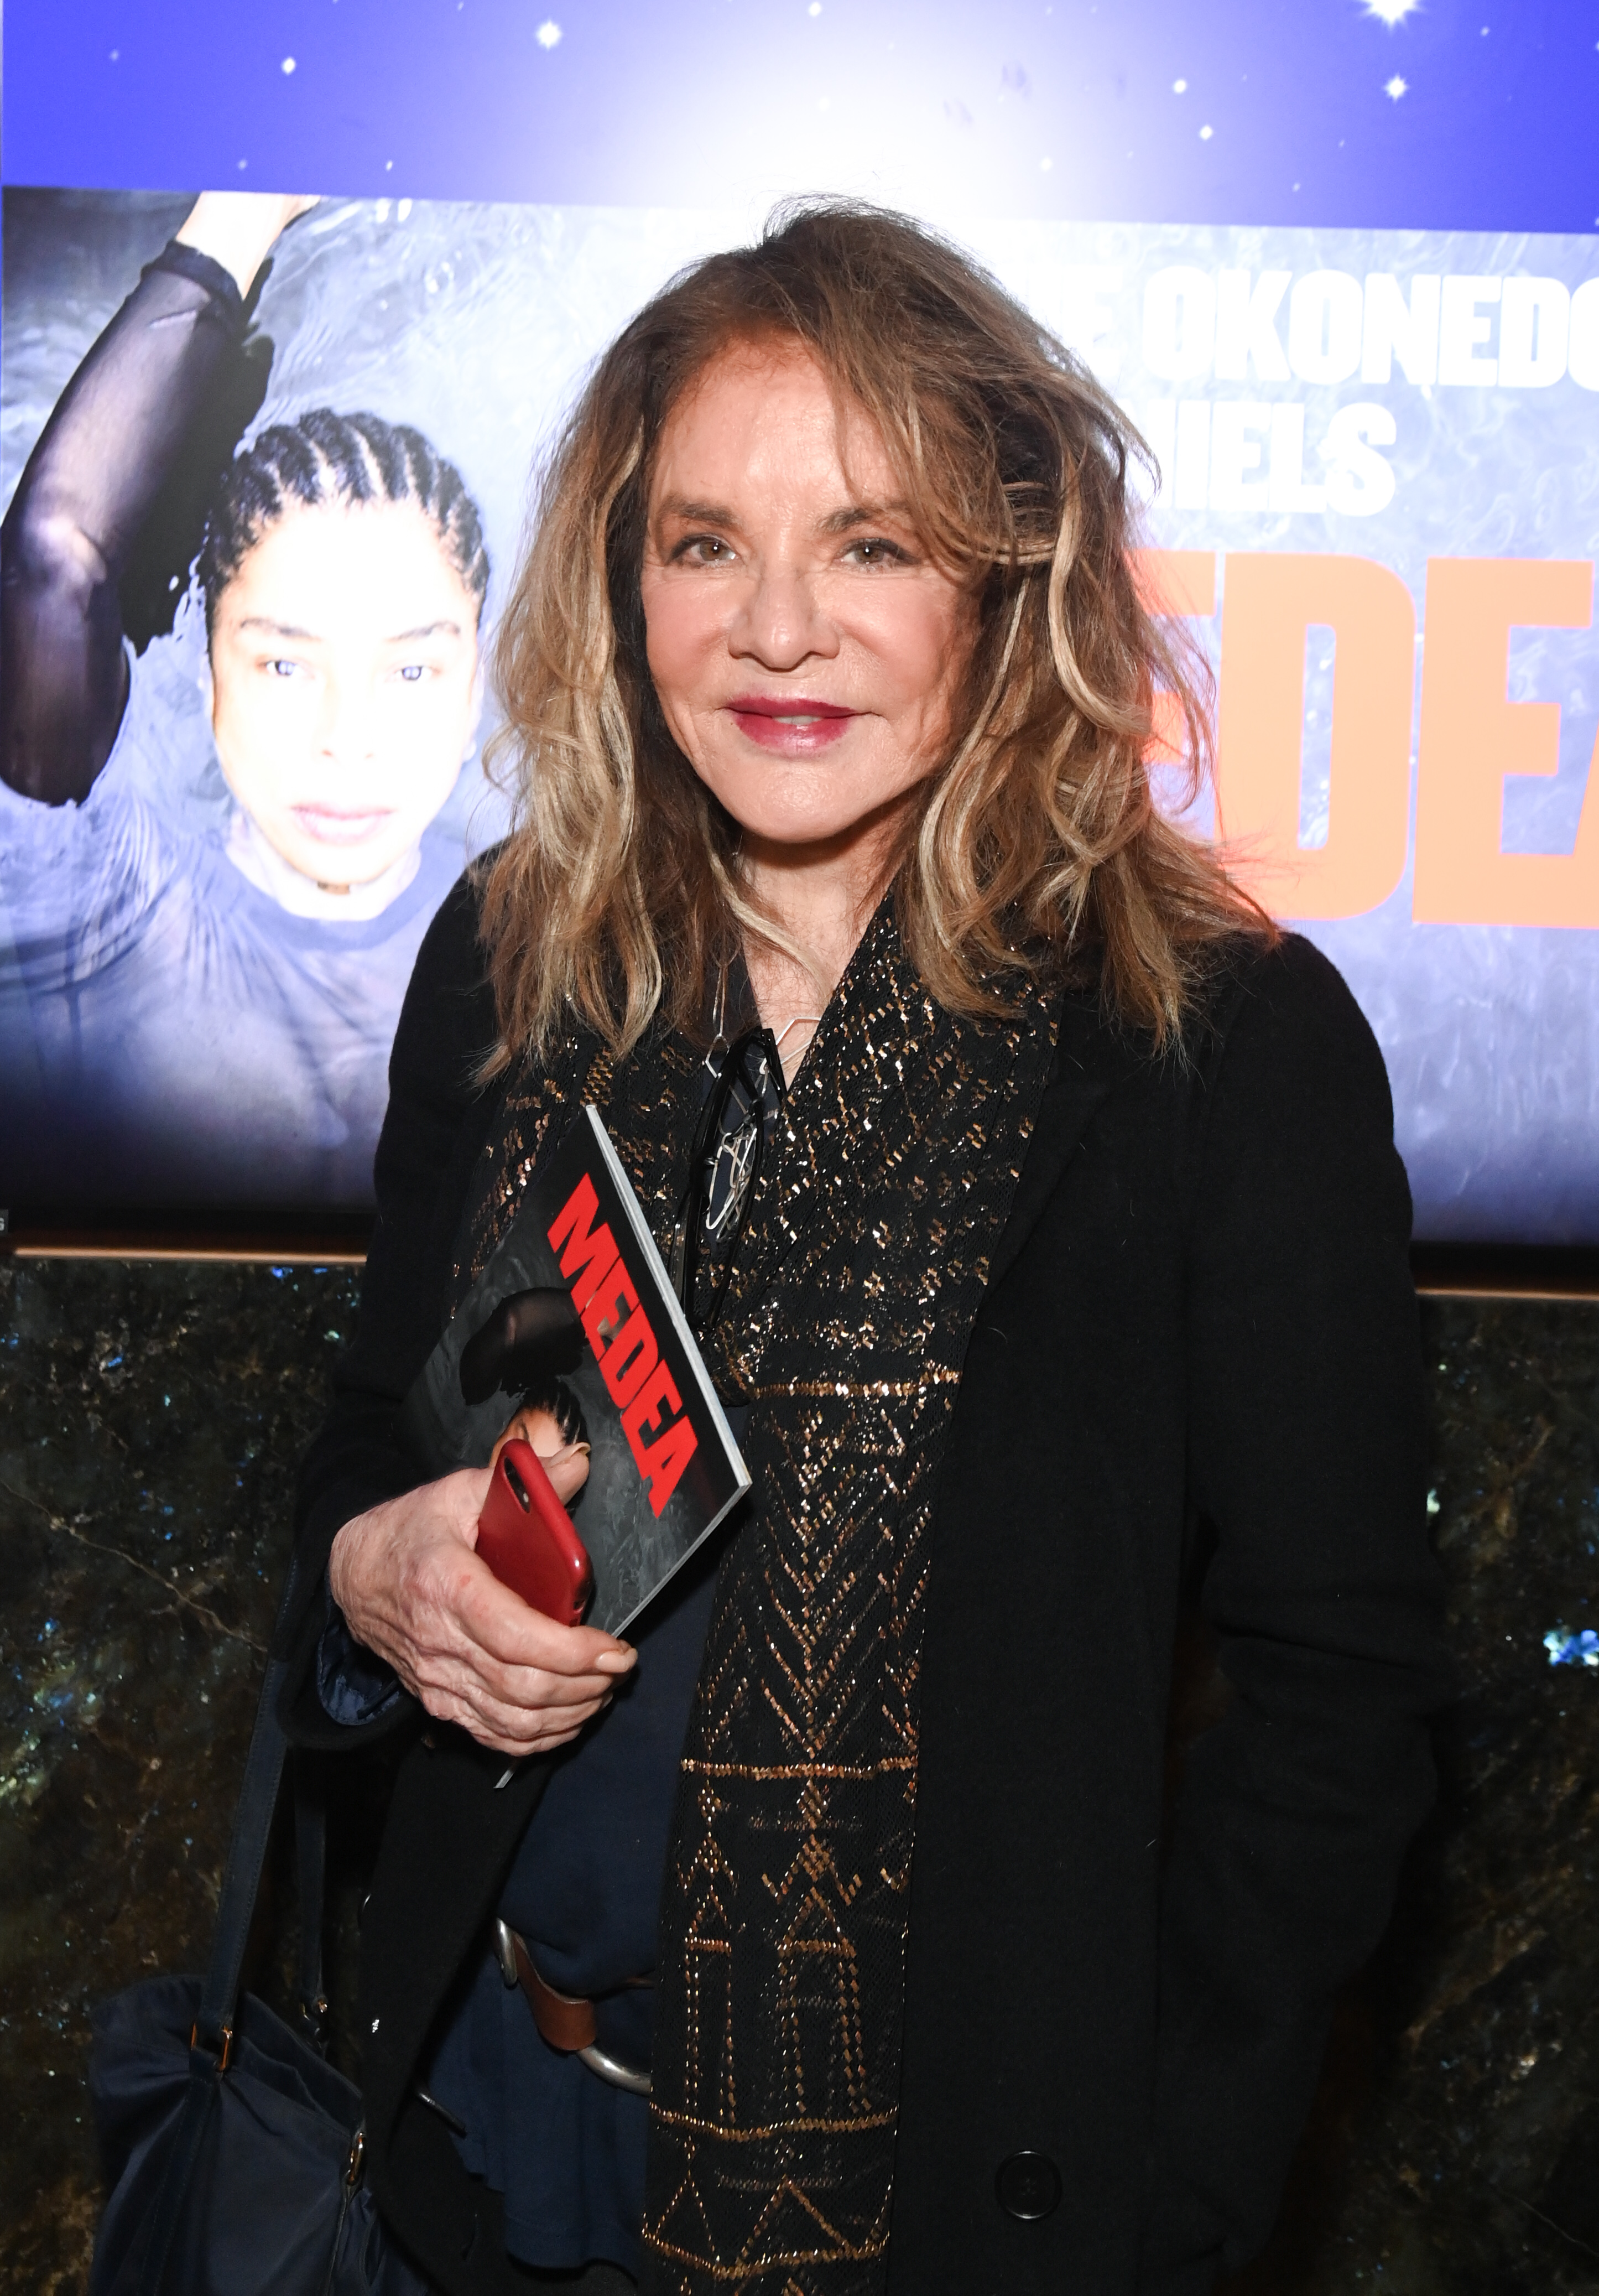 Stockard Channing on February 17, 2023, in London, England. | Source: Getty Images